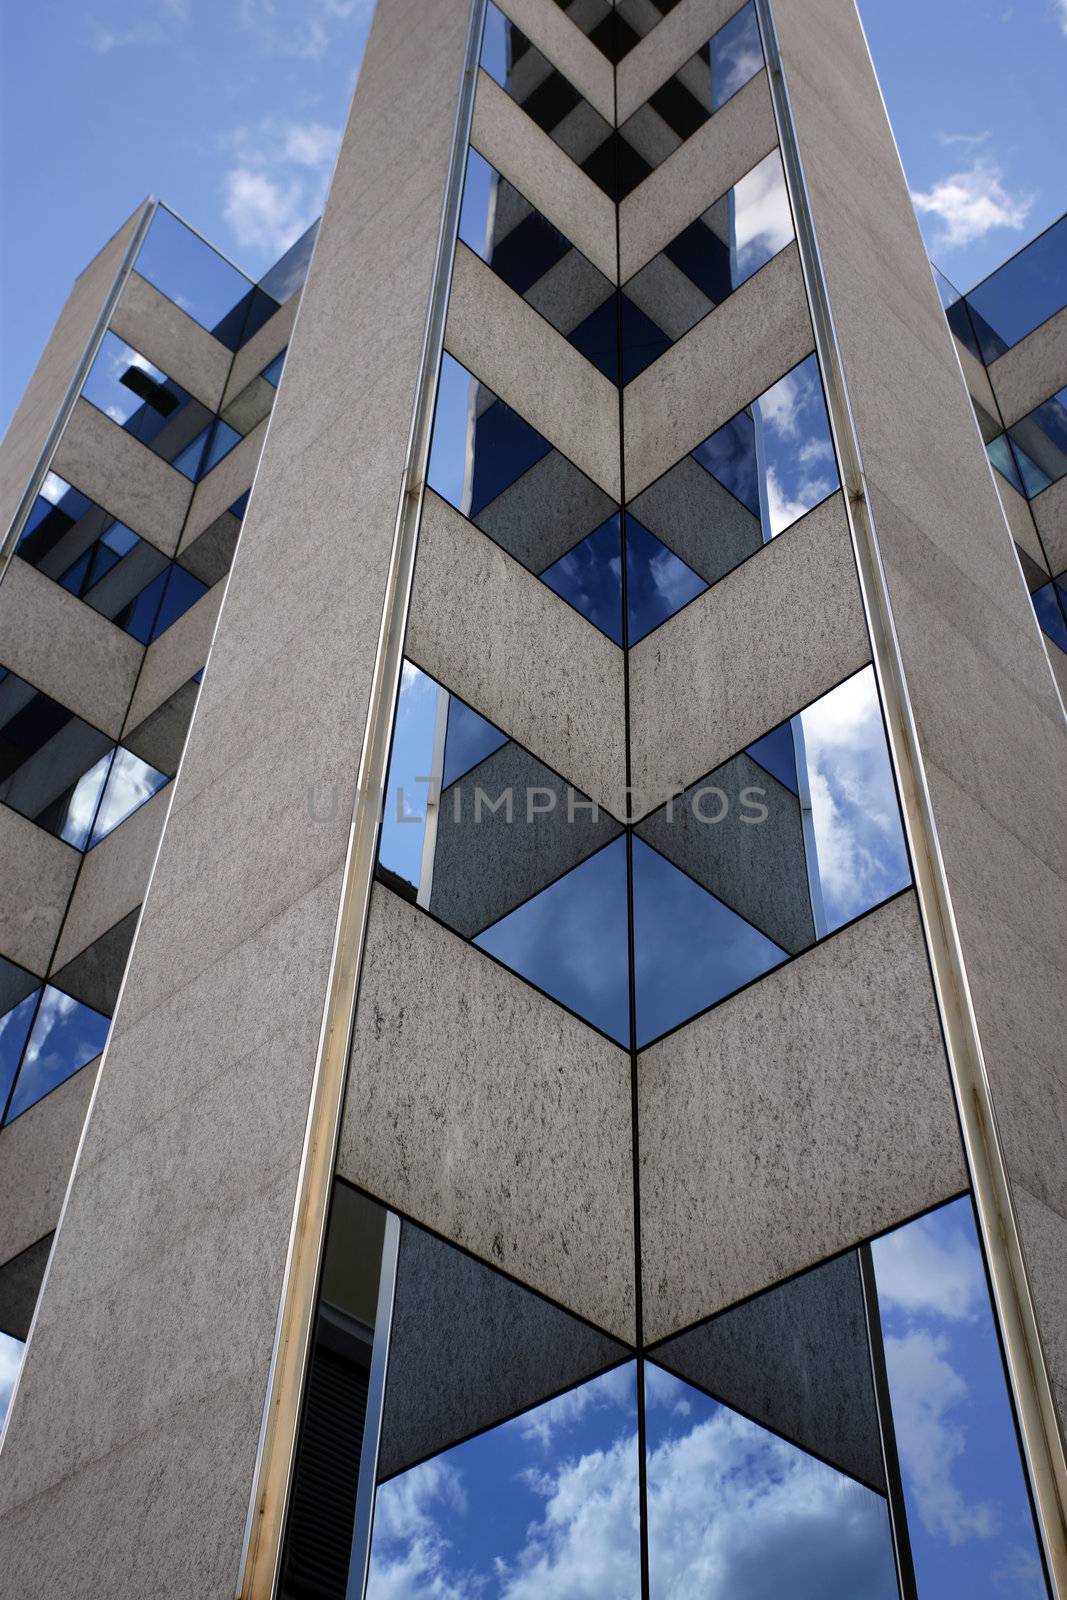 An office building in Switzerland reflecting the sky and clouds in its windows.
